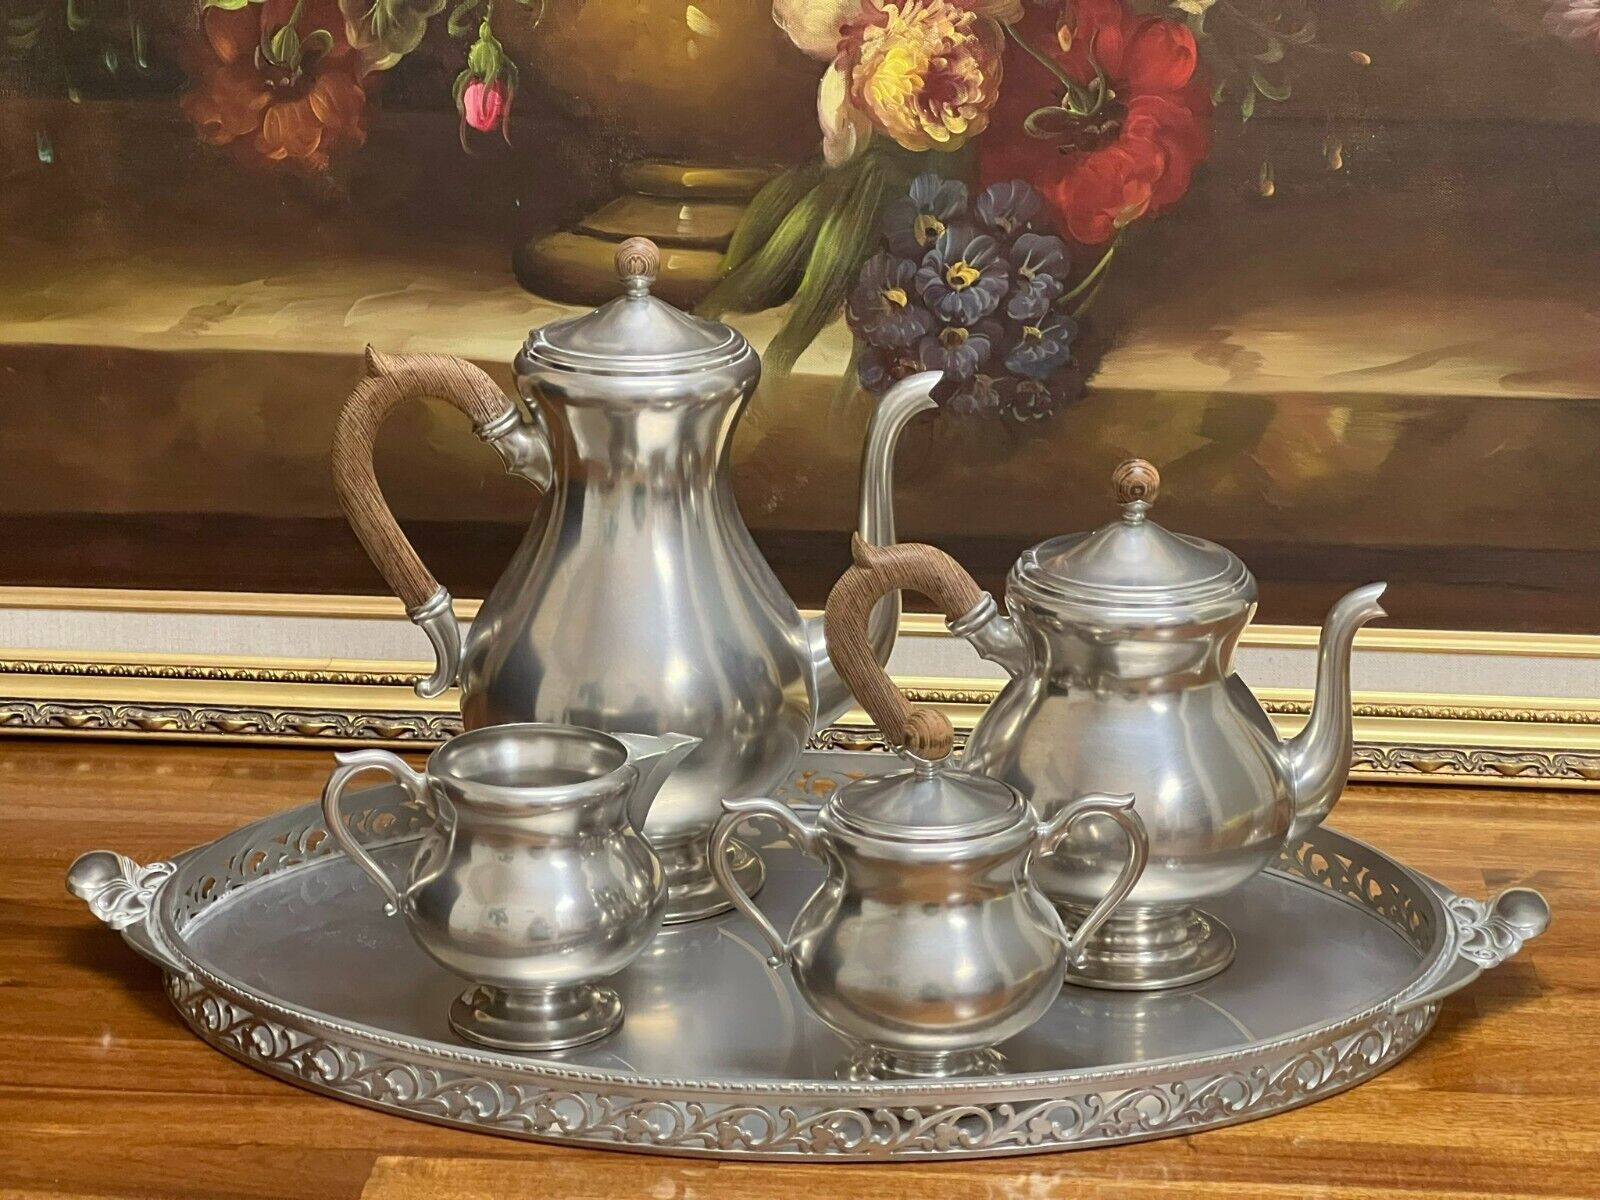 Vintage Royal Holland Complete Tea/Coffee Set W/ Wooden Handle. 5 Pieces. Made i